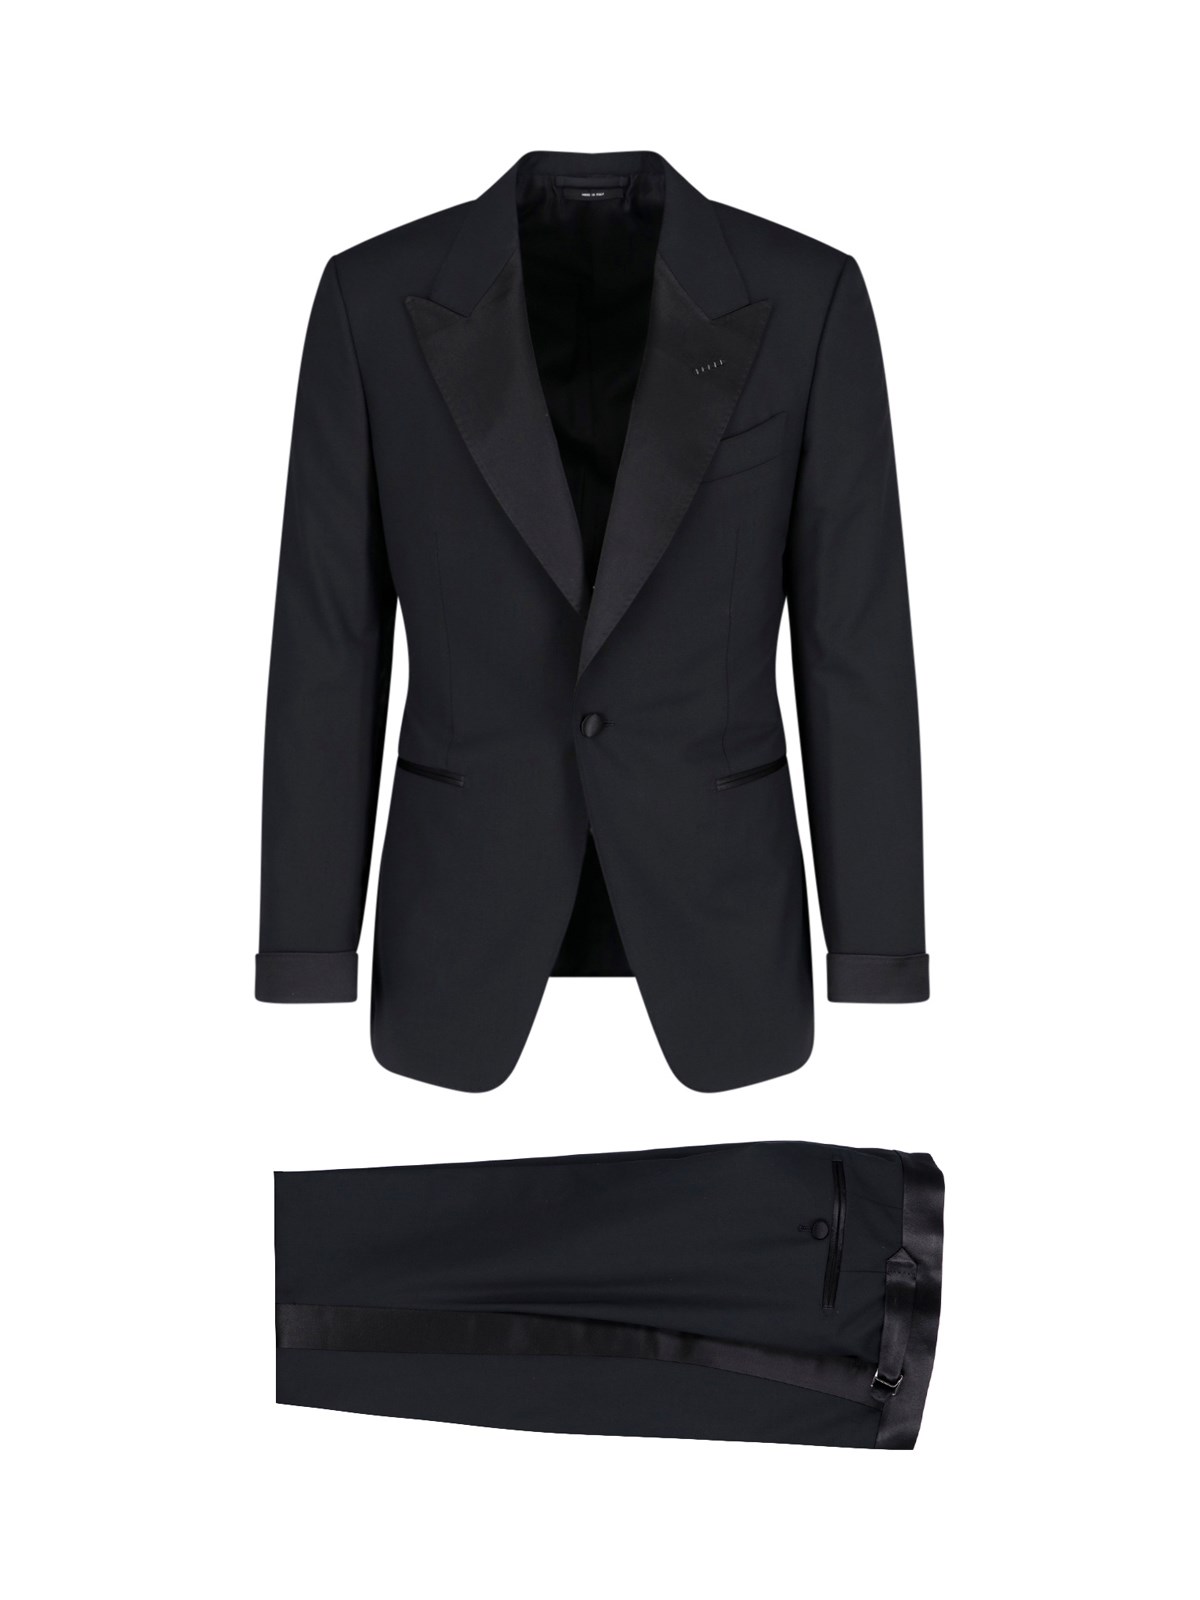 TOM FORD SINGLE-BREASTED SUIT